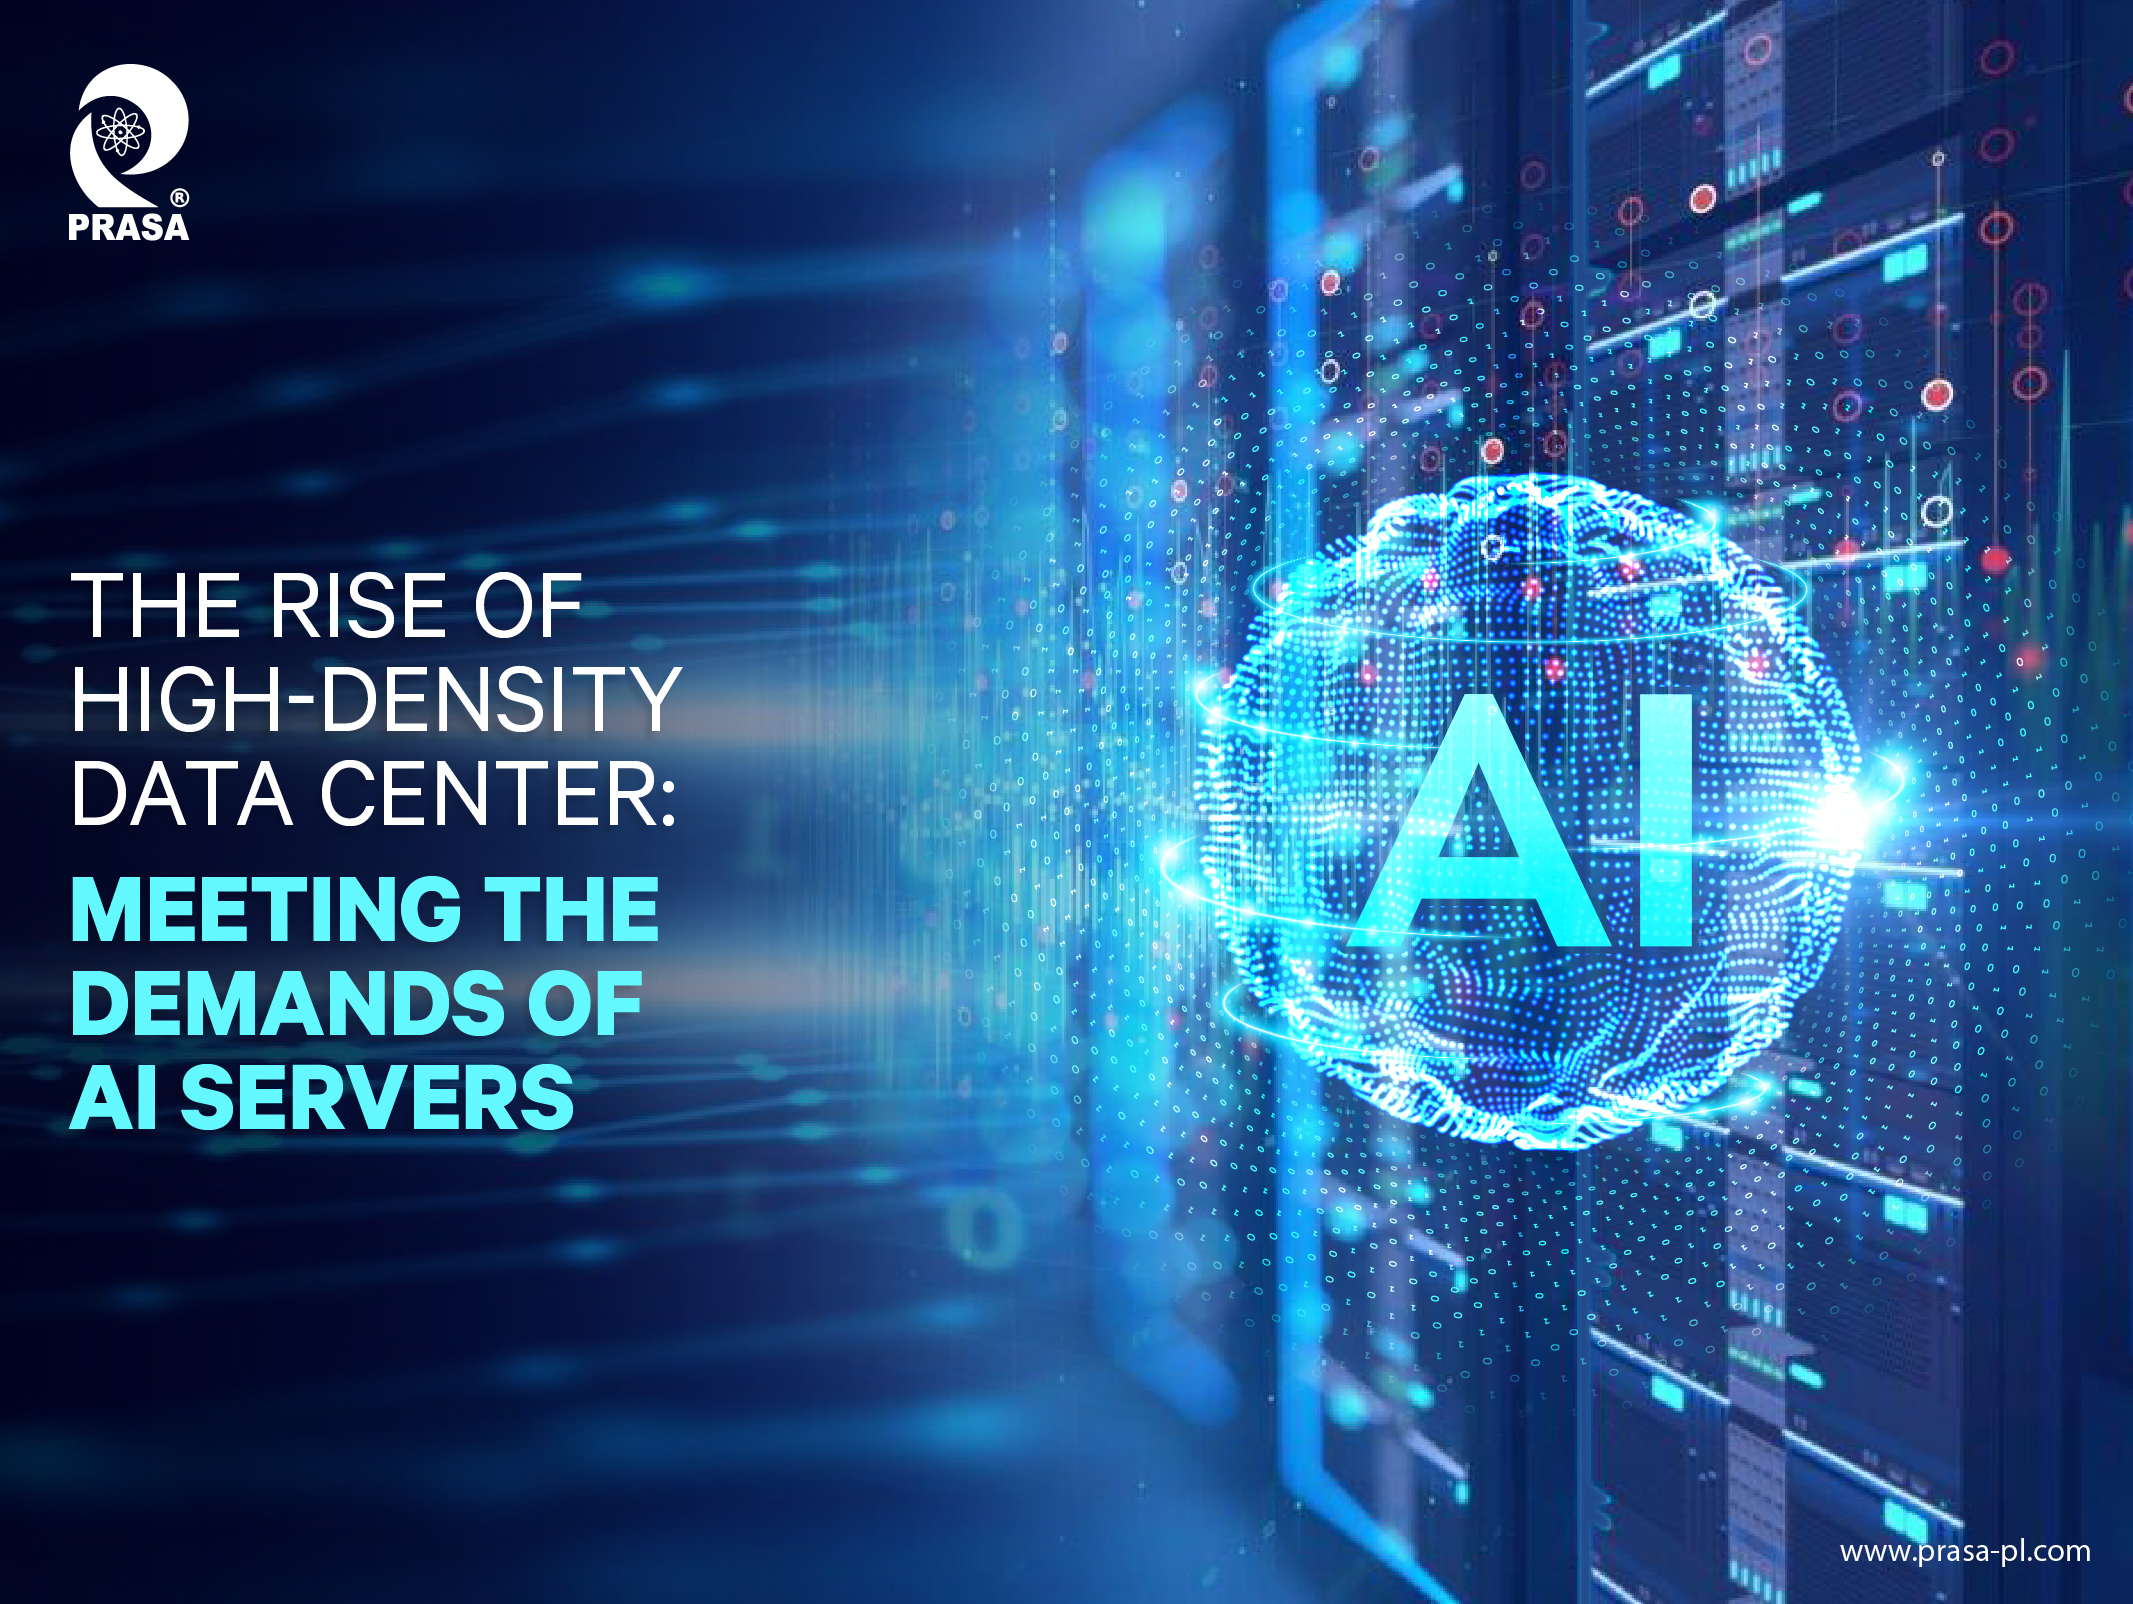 The Rise of High-Density Data Centers: Meeting the Demands of AI Servers